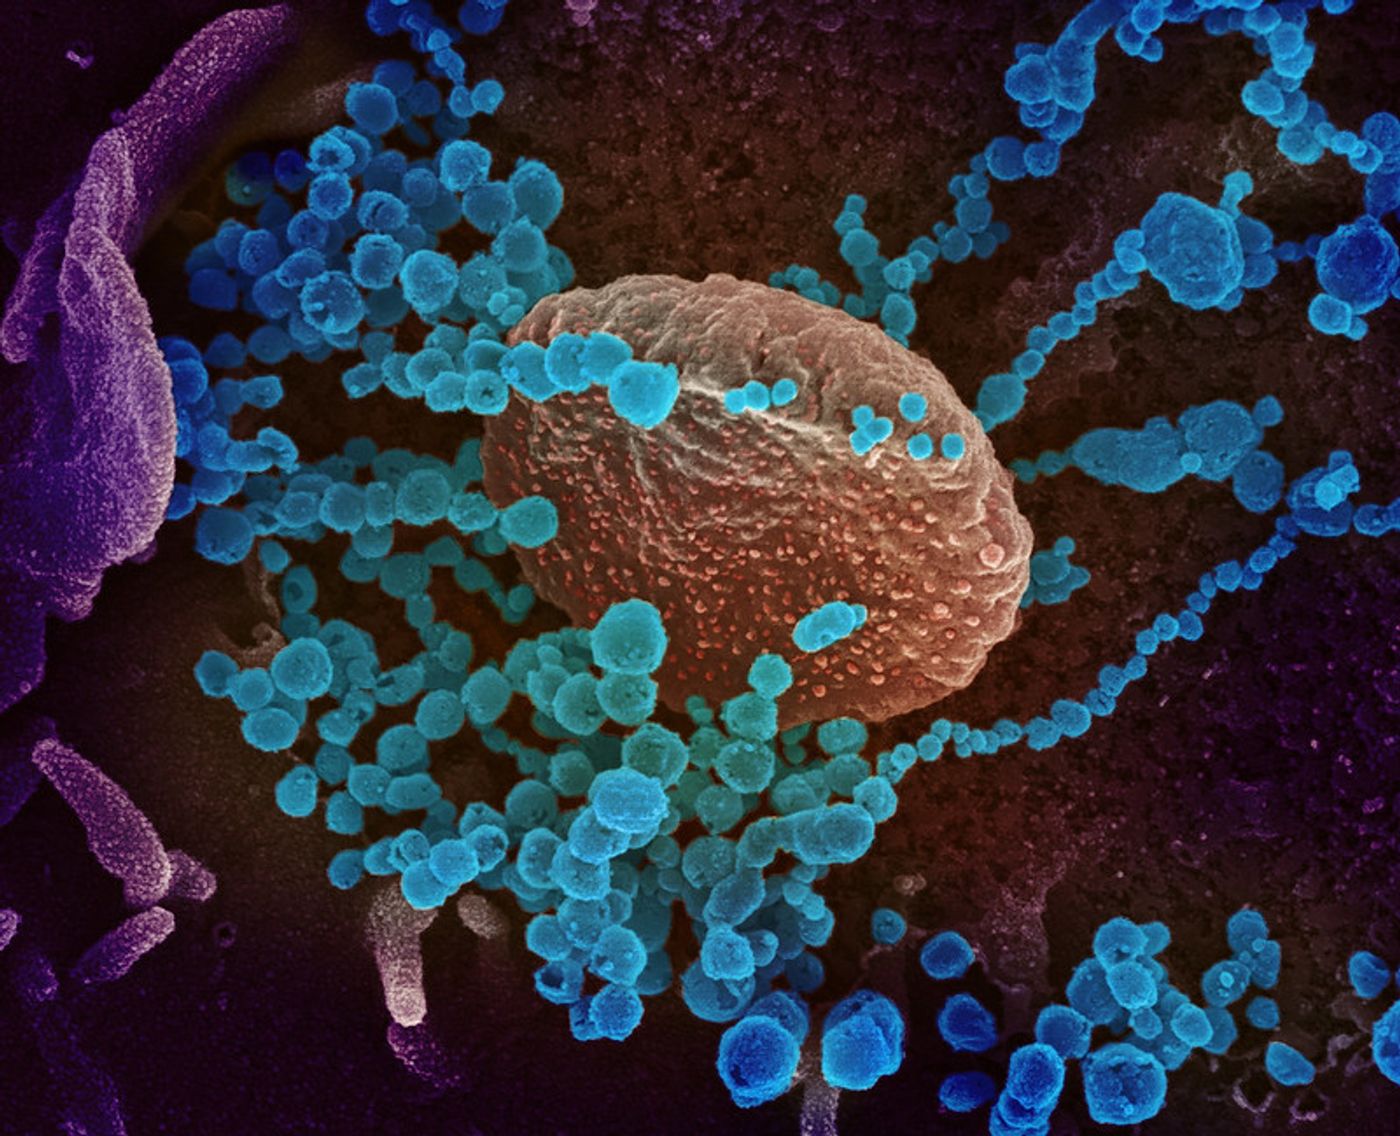 This scanning electron microscope image shows SARS-CoV-2 (round blue objects) emerging from the surface of cells cultured in the lab. SARS-CoV-2, also known as 2019-nCoV, is the virus that causes COVID-19. The virus shown was isolated from a patient in the U.S. Image captured and colorized at NIAID's Rocky Mountain Laboratories (RML) in Hamilton, Montana. / Credit: NIAID